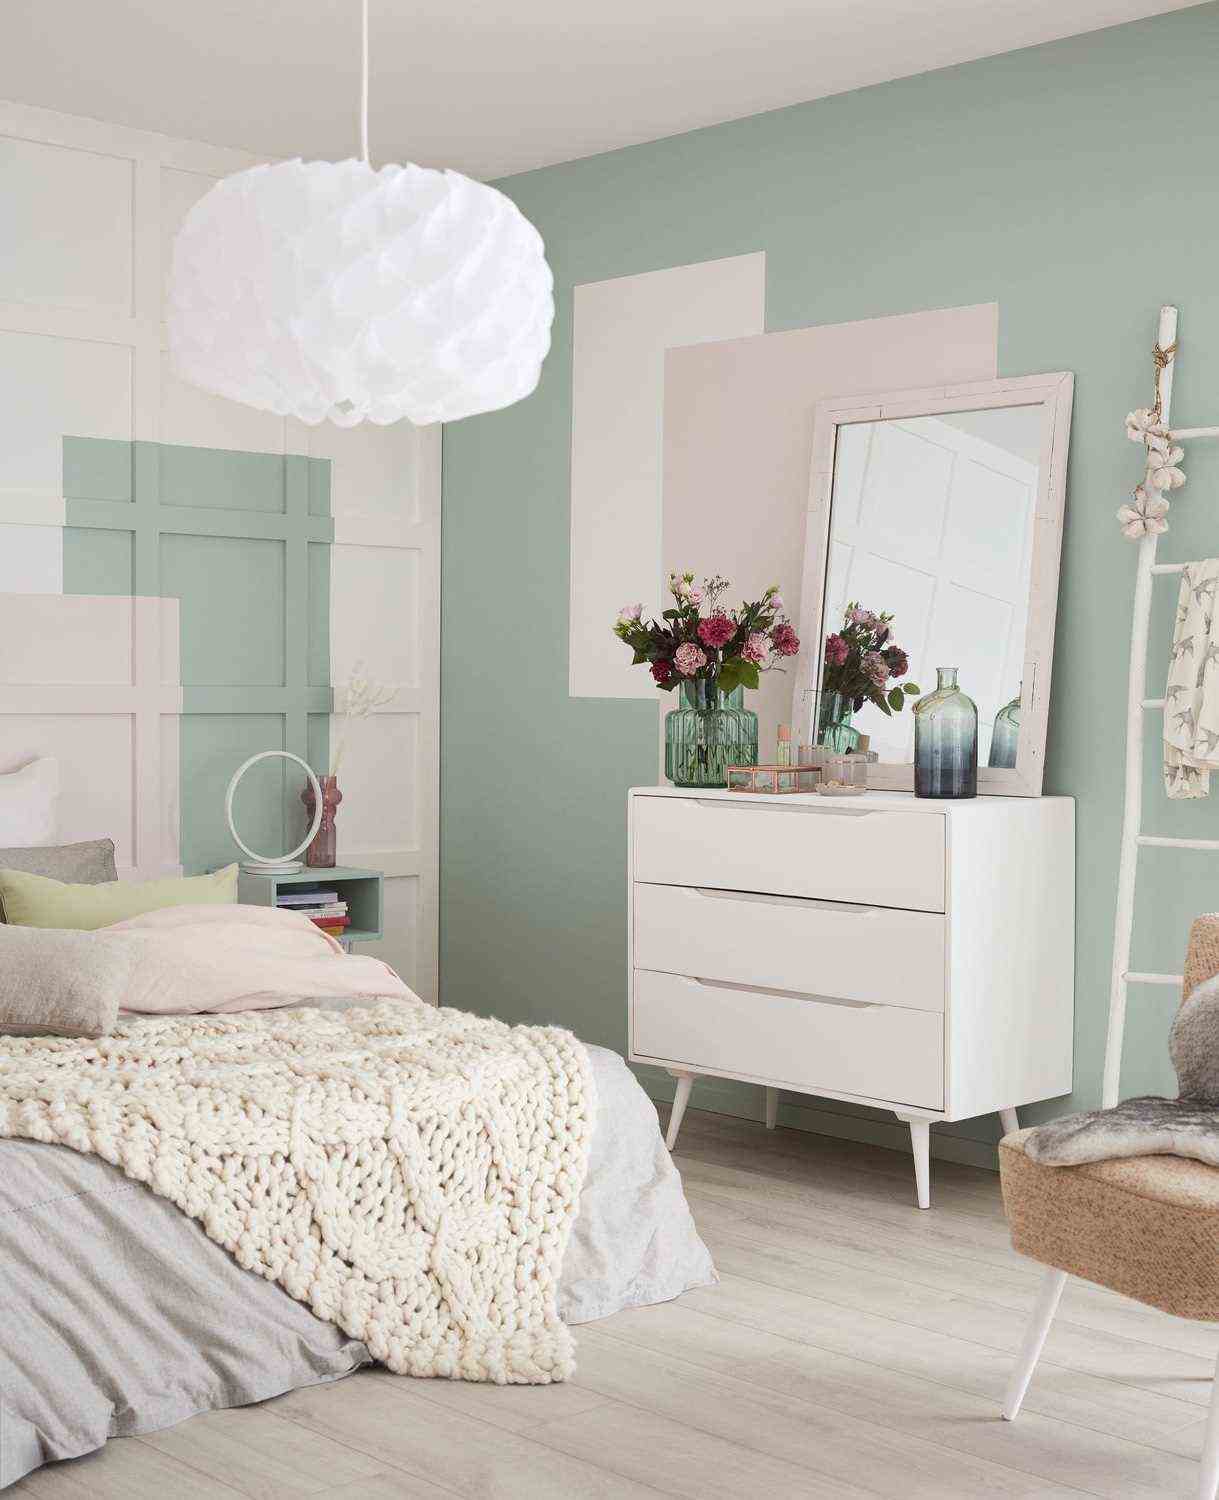 Pastel Colors And Large Mirror